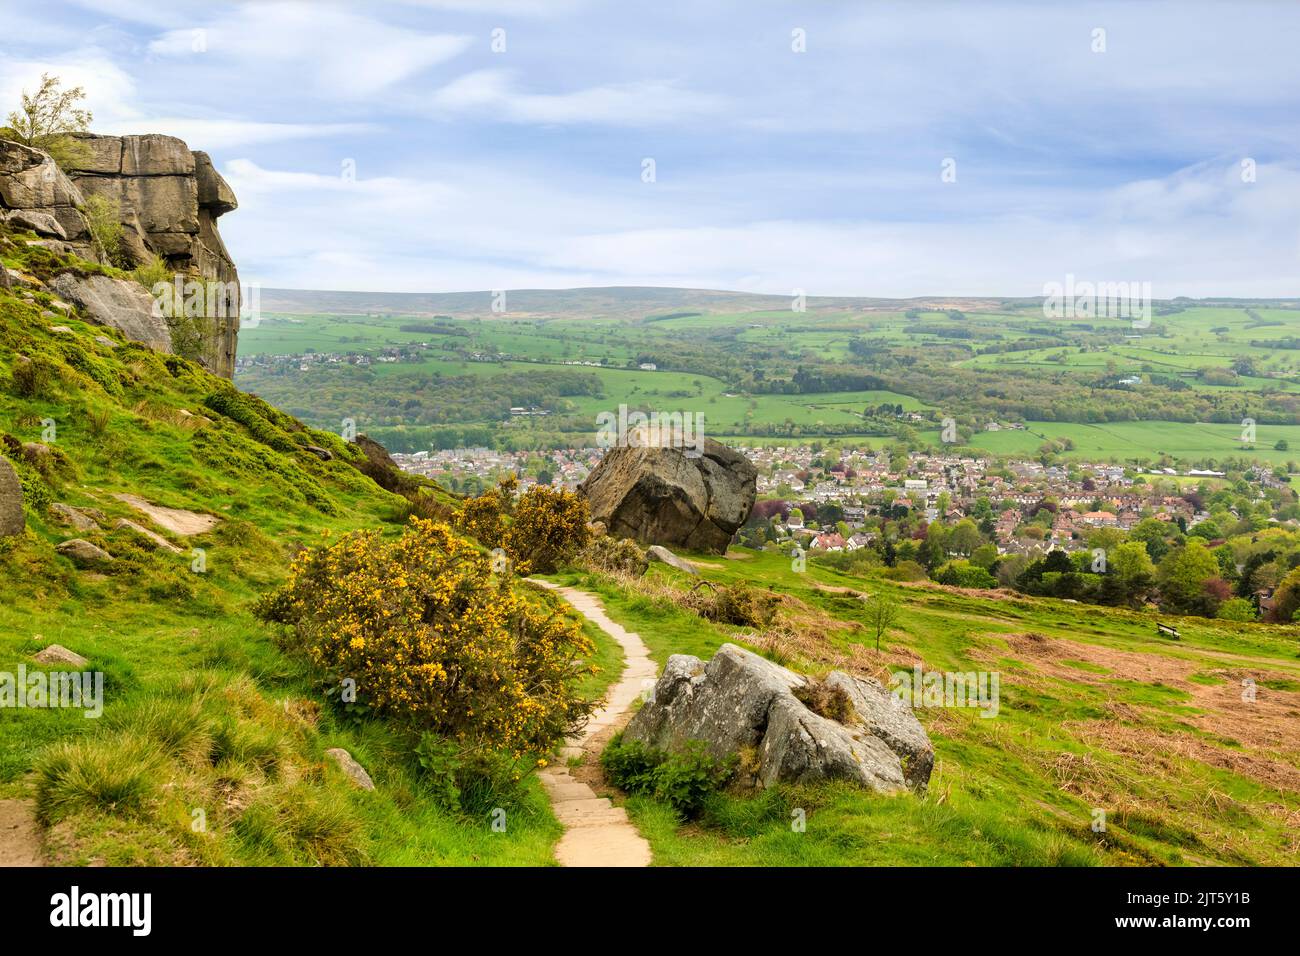 Ilkley Moor, with the Cow and Calf rocks, a footpath, gorse, and a view over the West Yorkshire mill town of Ilkley. Stock Photo